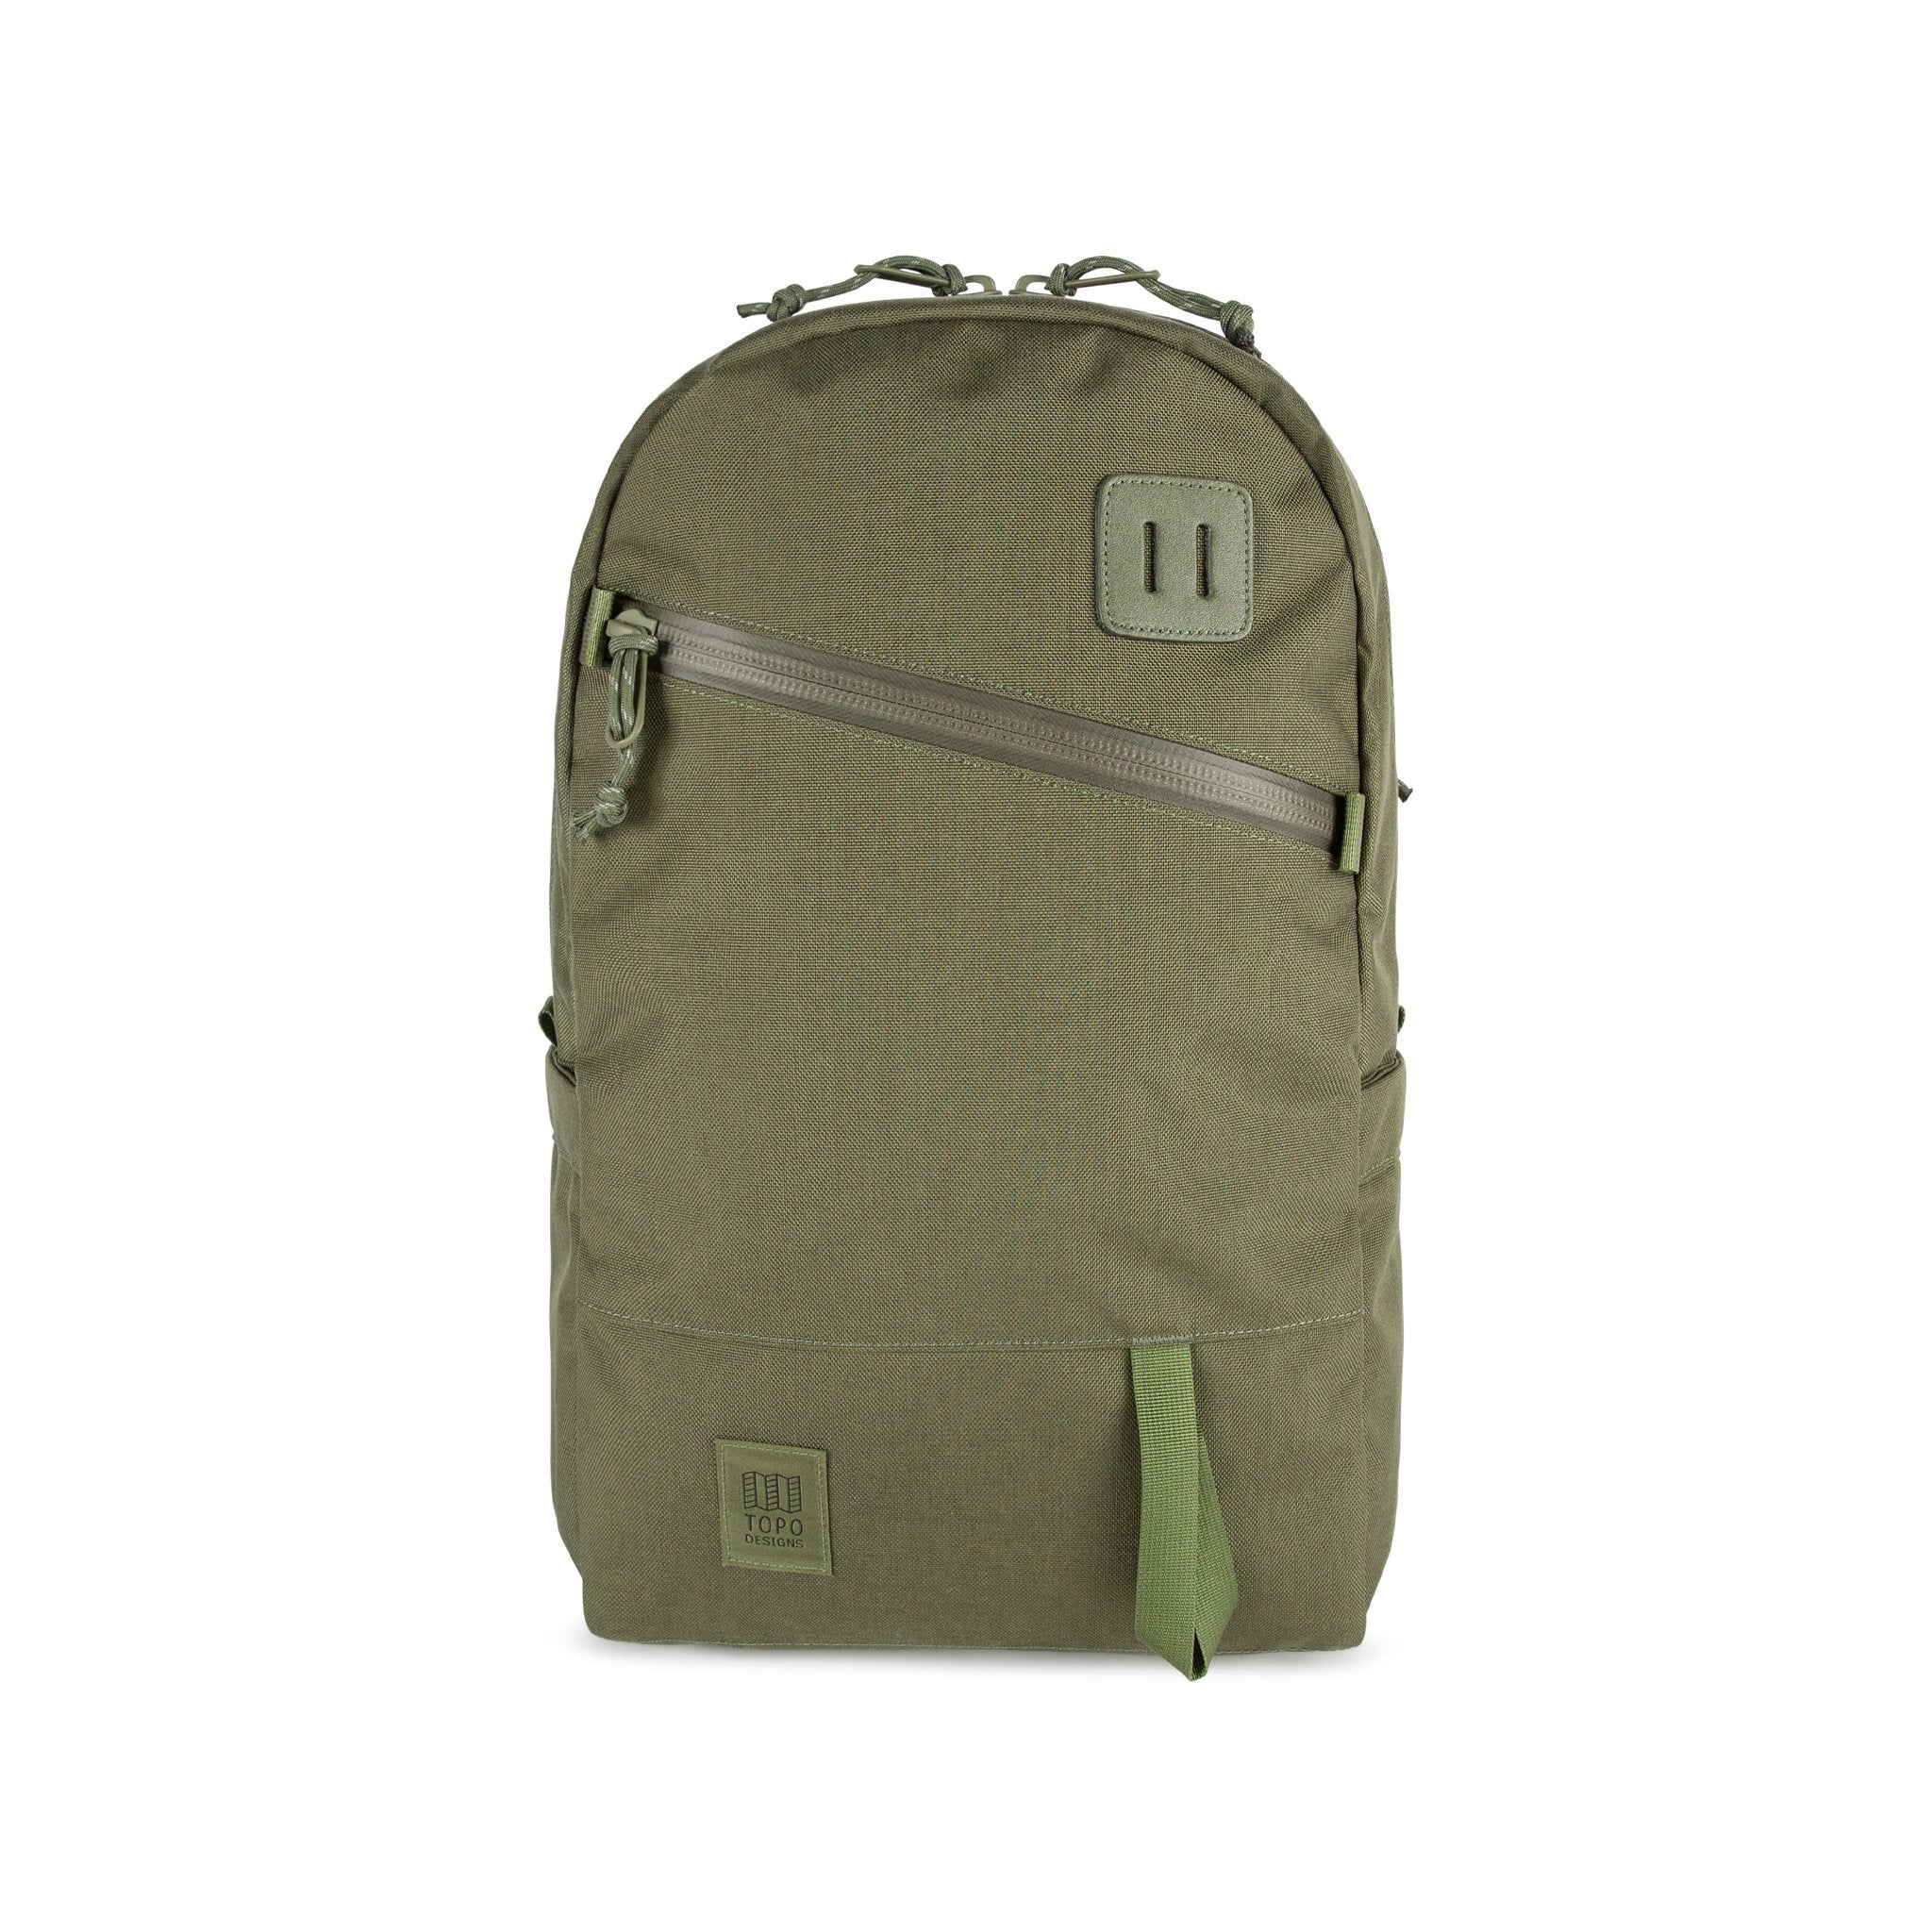 Topo Designs Daypack Tech 100% recycled nylon backpack with external laptop access in "Olive" green.